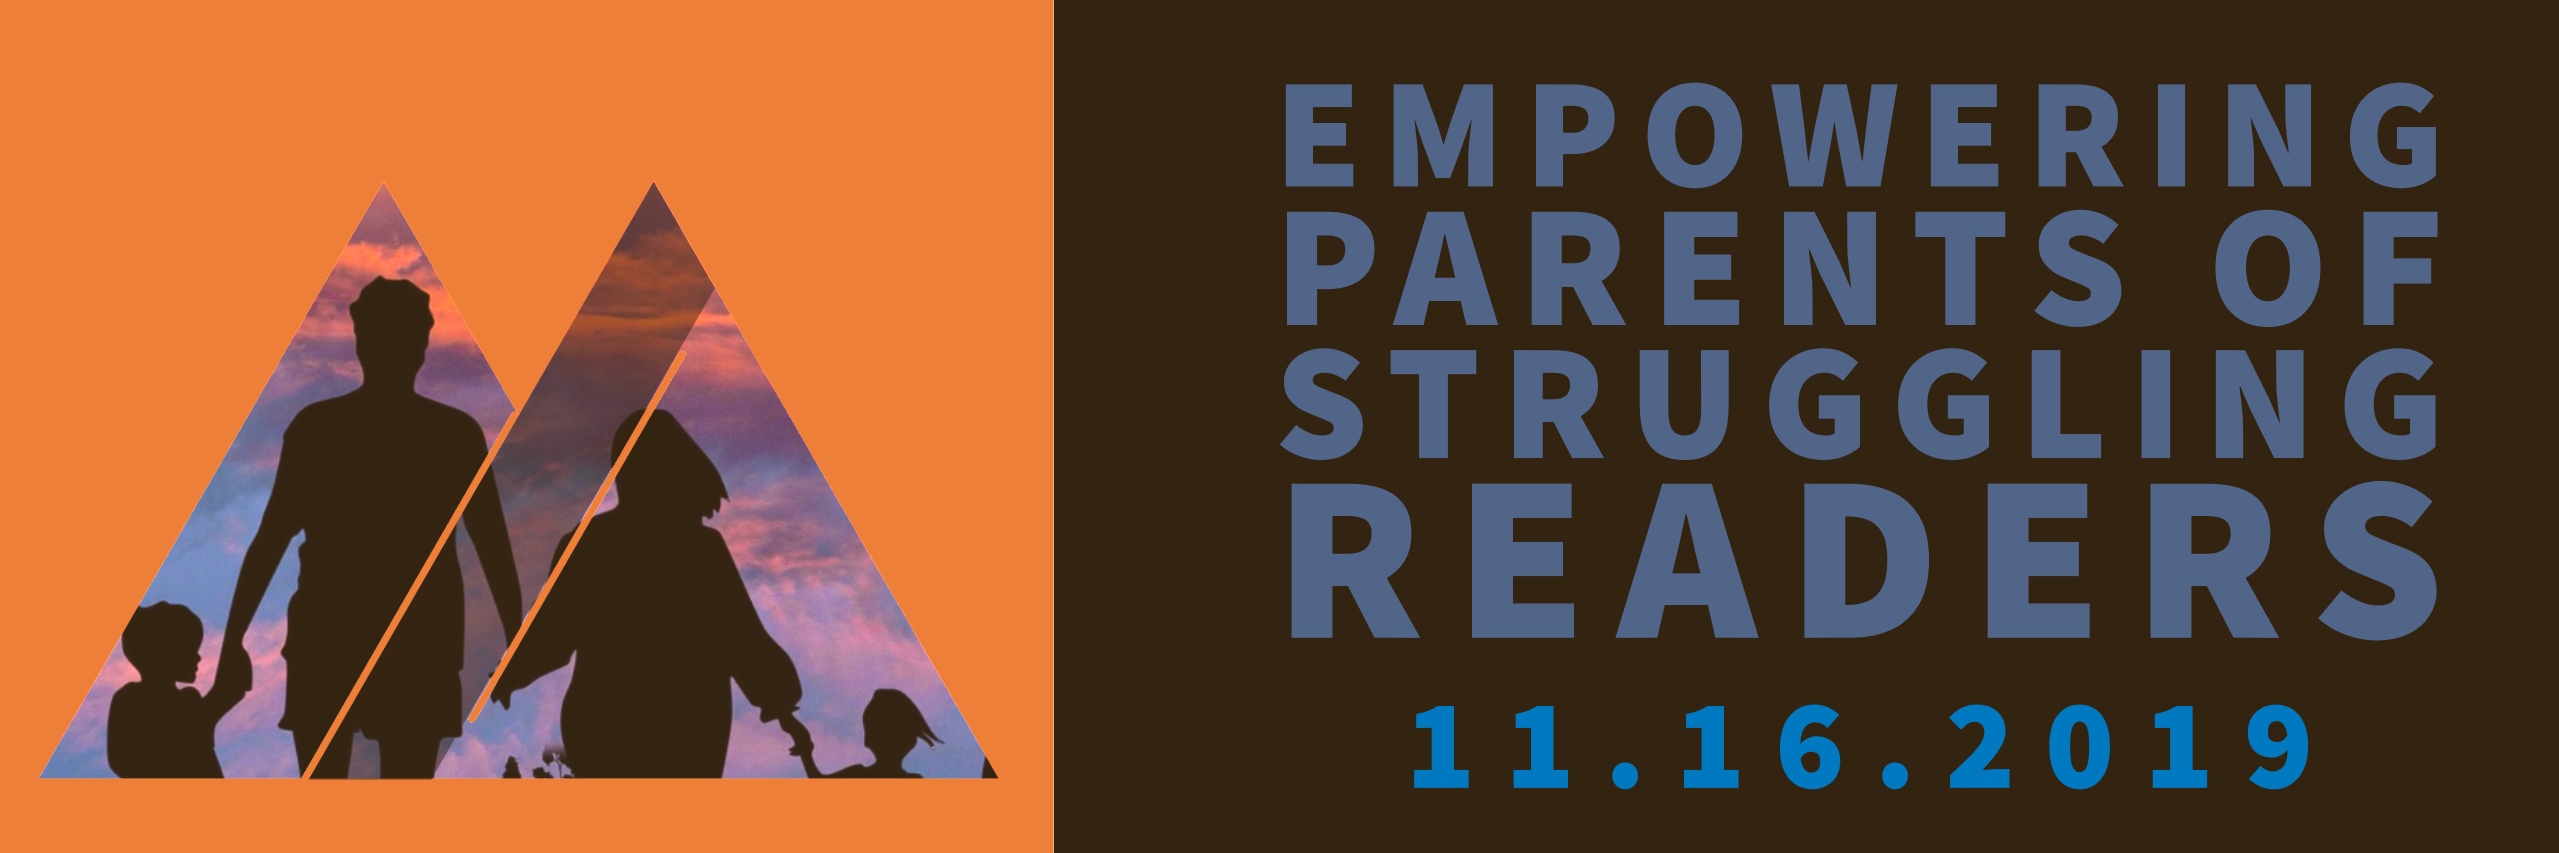 Empowering Parents of Struggling Readers A Collaborative Event 11/16/2019